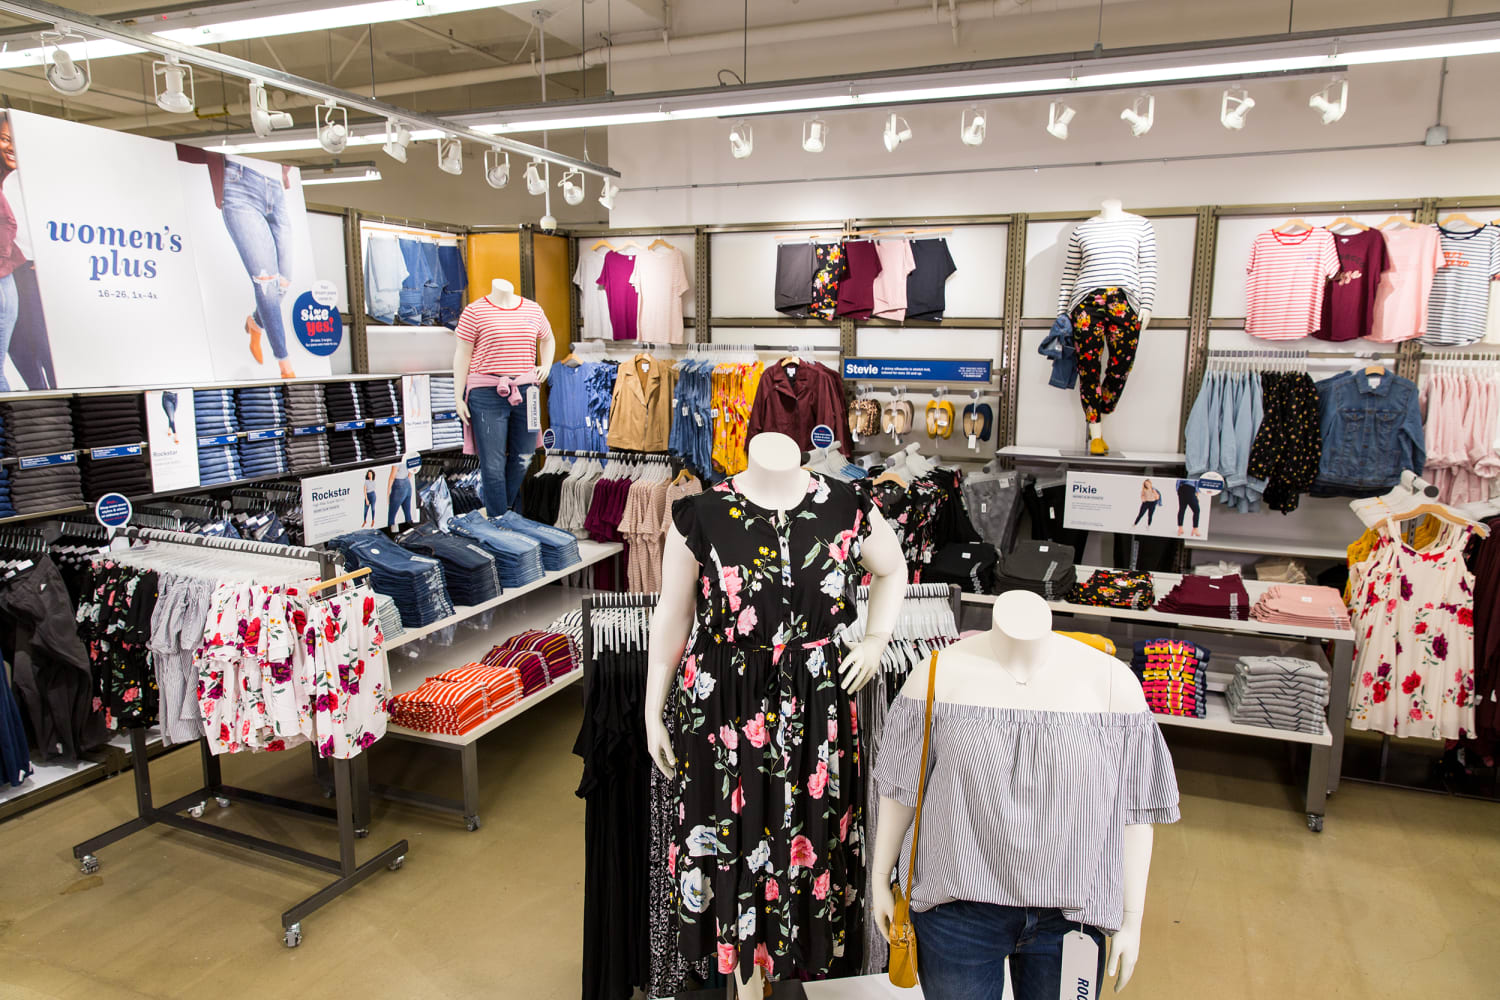 Old Navy is bringing back plus sizes to select stores